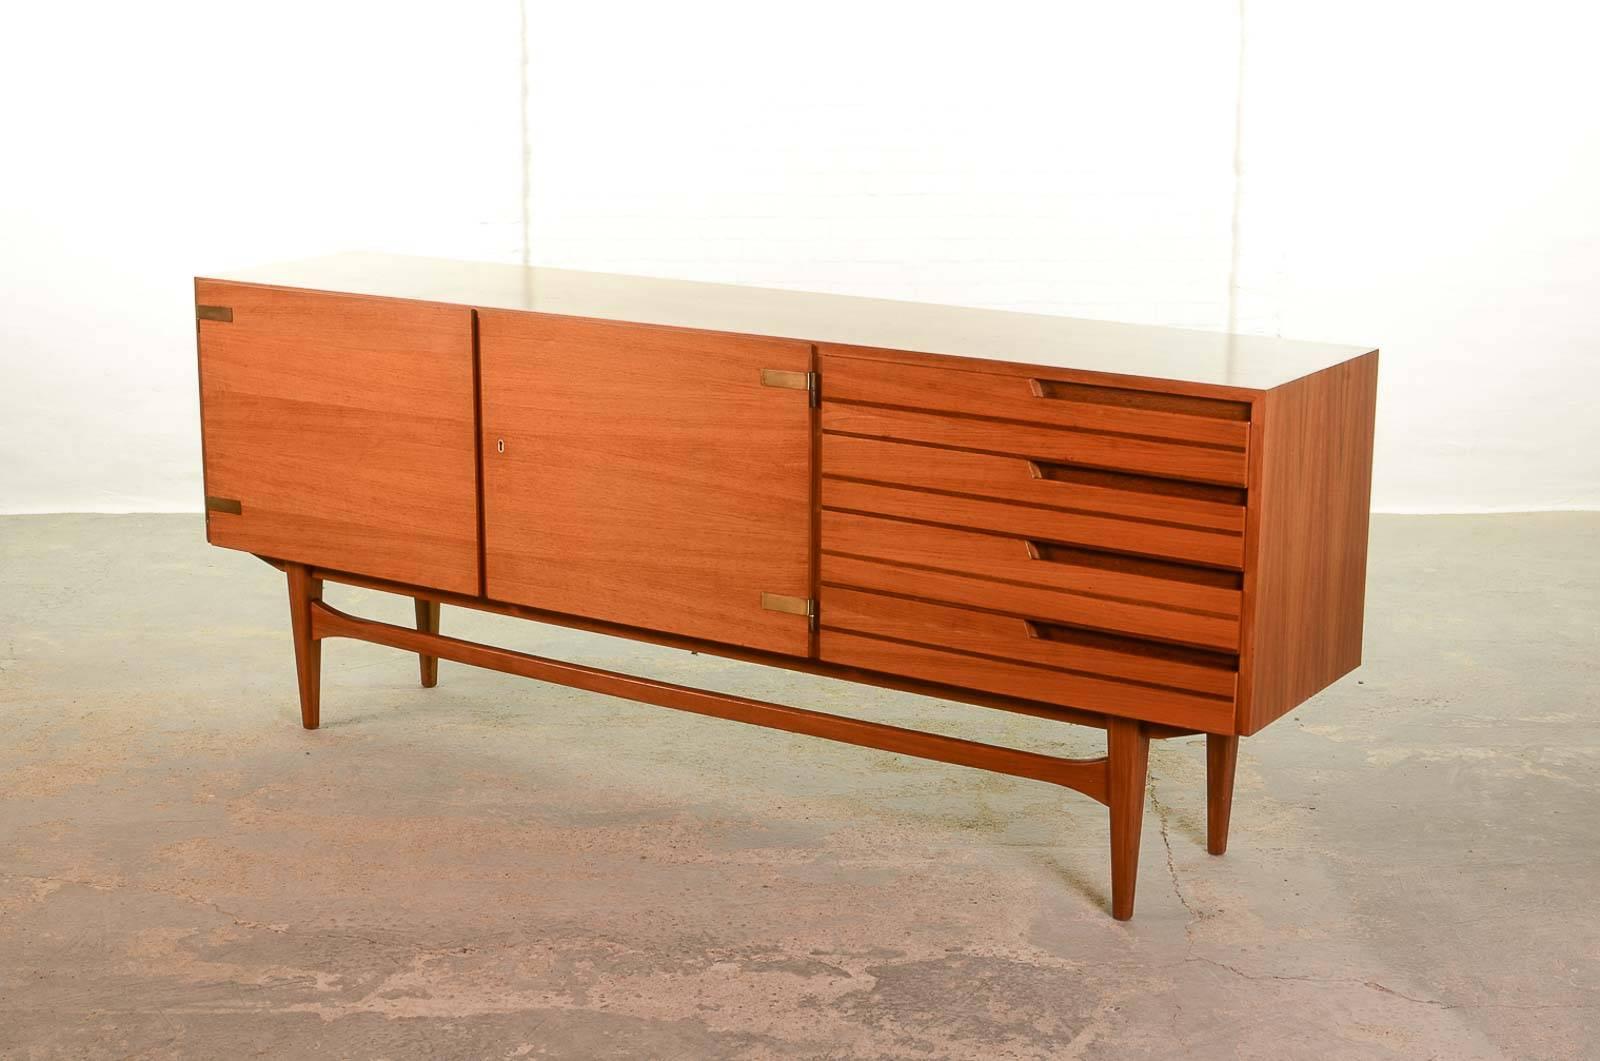 Satinwood teak sideboard/credenza decorated with elegant brass hinges. The right side of the sideboard contains four duotone wooden drawers with partly carved out strips suggesting subtle handgrips. The design shows a variety of Fine details